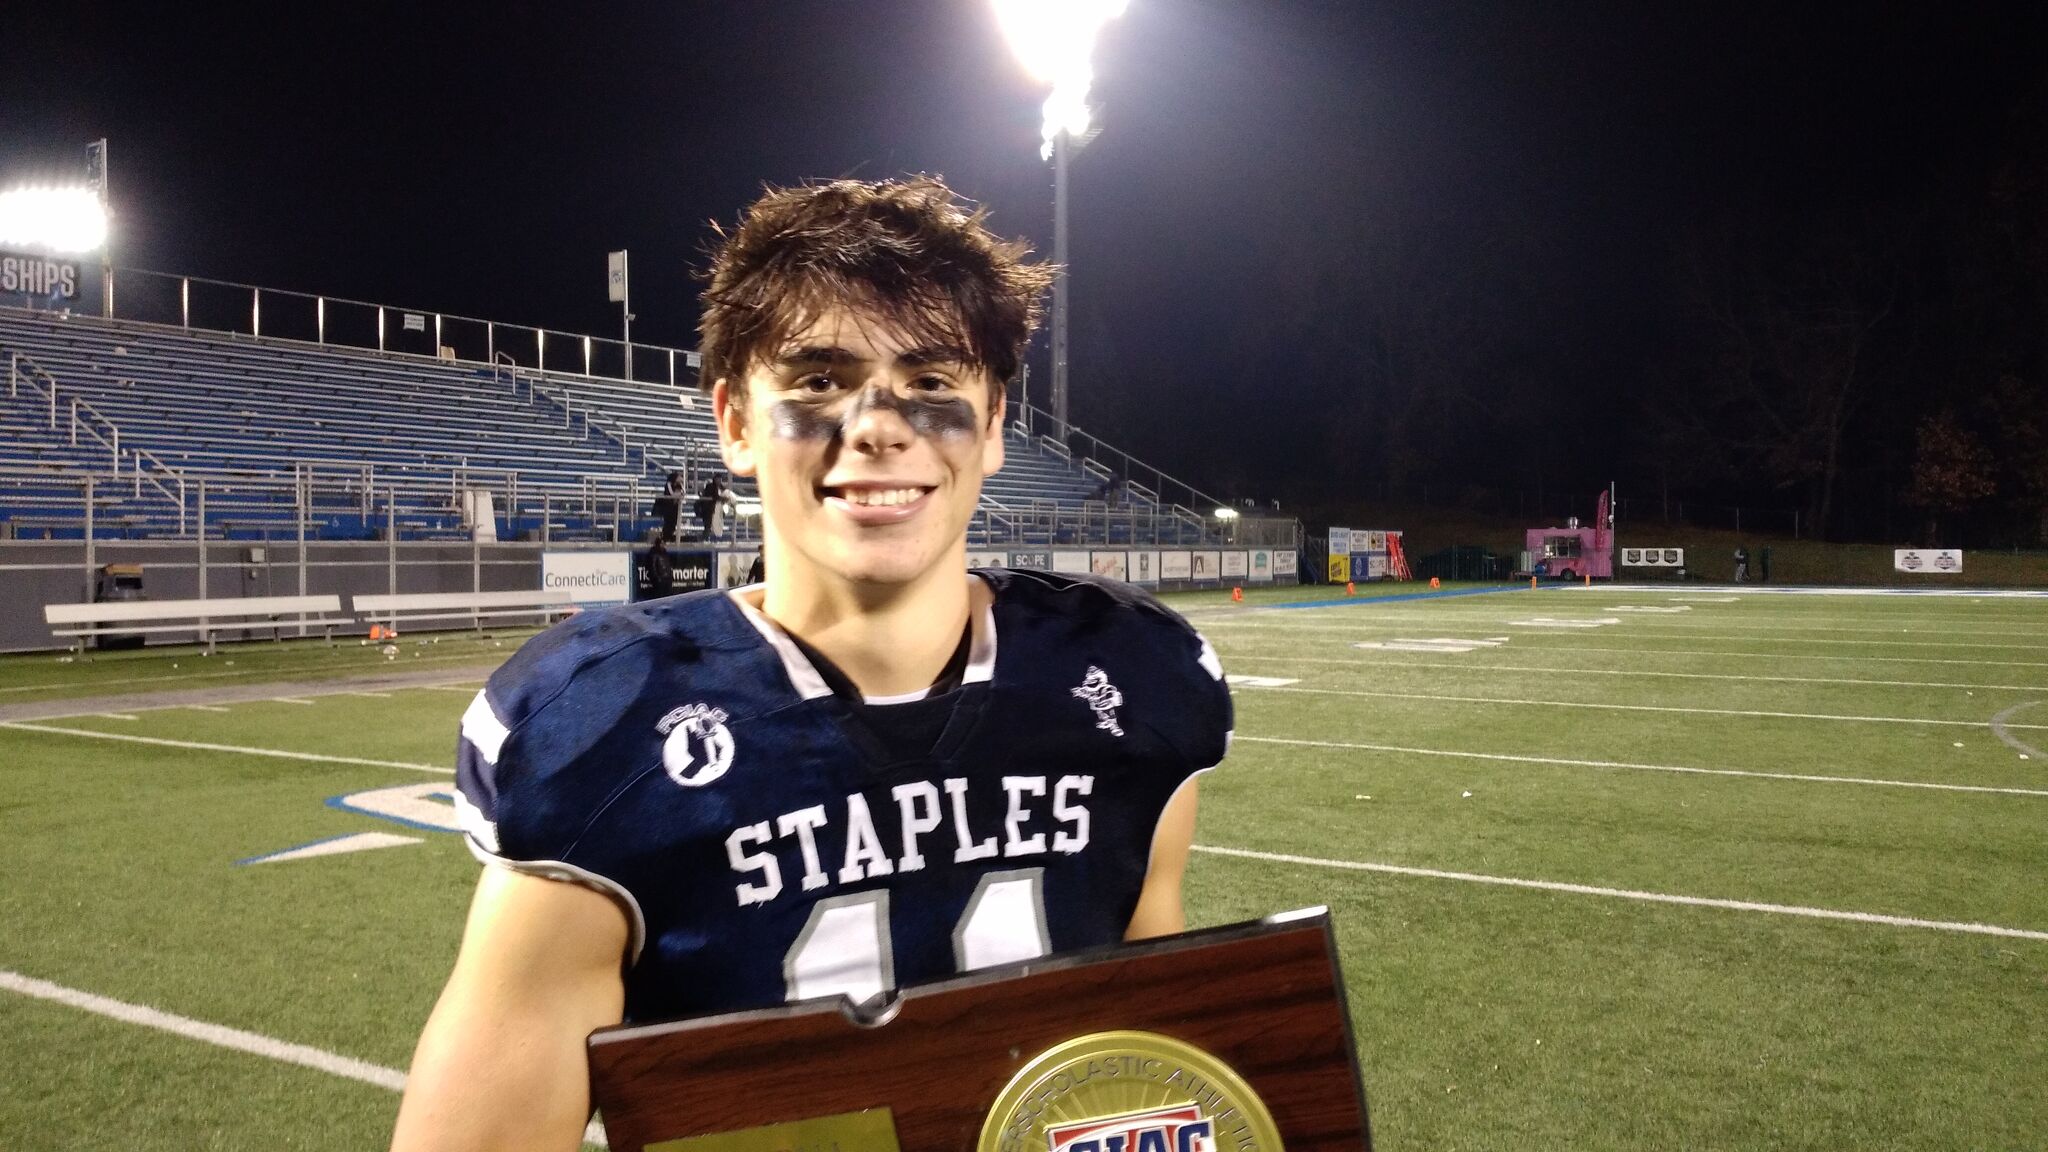 Staples' Max Maurillo shook off miss to make game-winning play